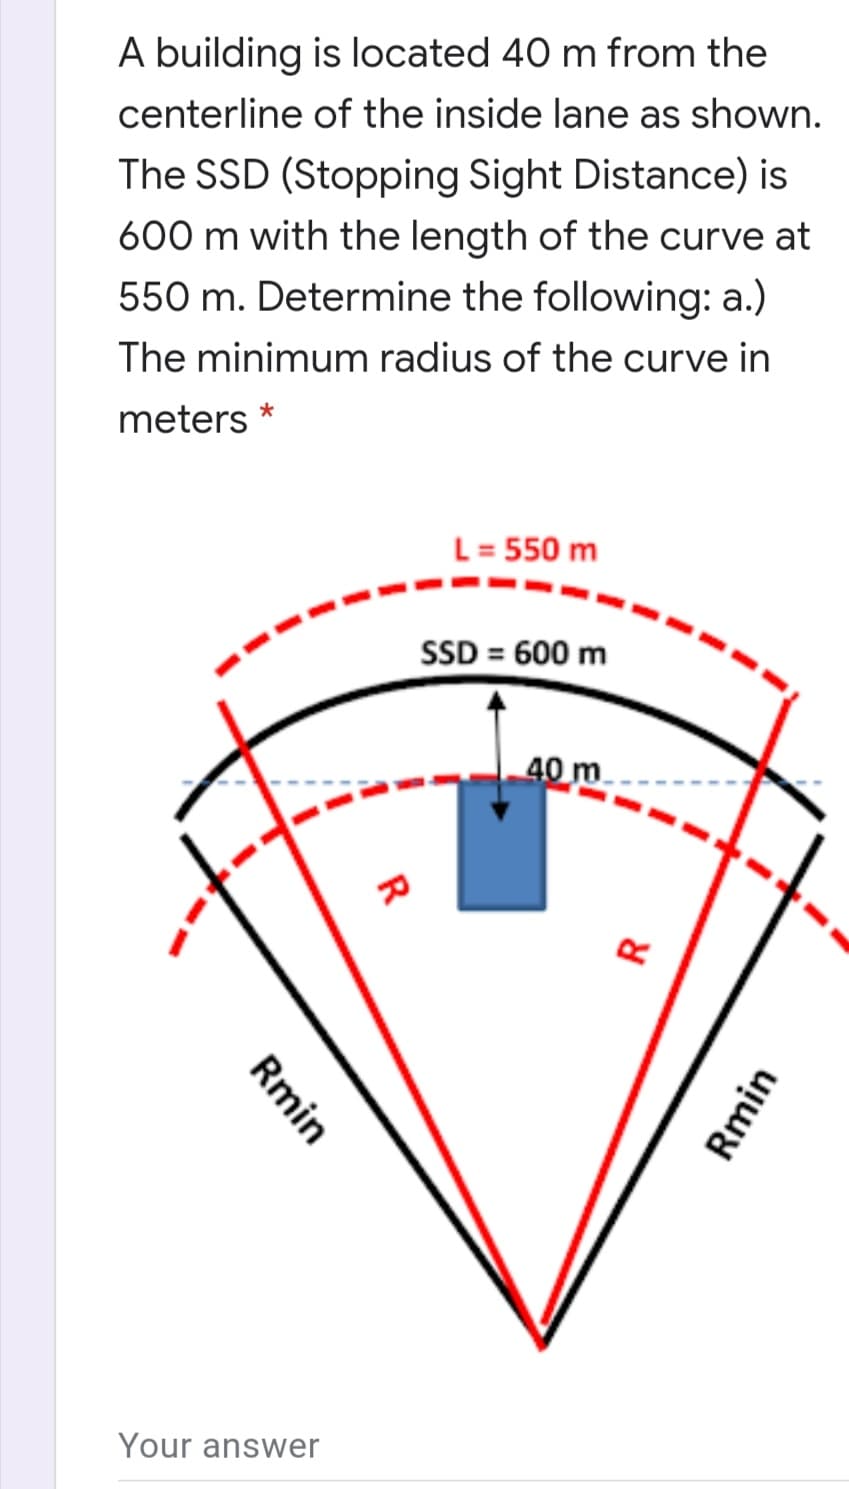 A building is located 40 m from the
centerline of the inside lane as shown.
The SSD (Stopping Sight Distance) is
600 m with the length of the curve at
550 m. Determine the following: a.)
The minimum radius of the curve in
meters *
L= 550 m
SD = 600 m
40 m
Your answer
Rmin
Rmin
